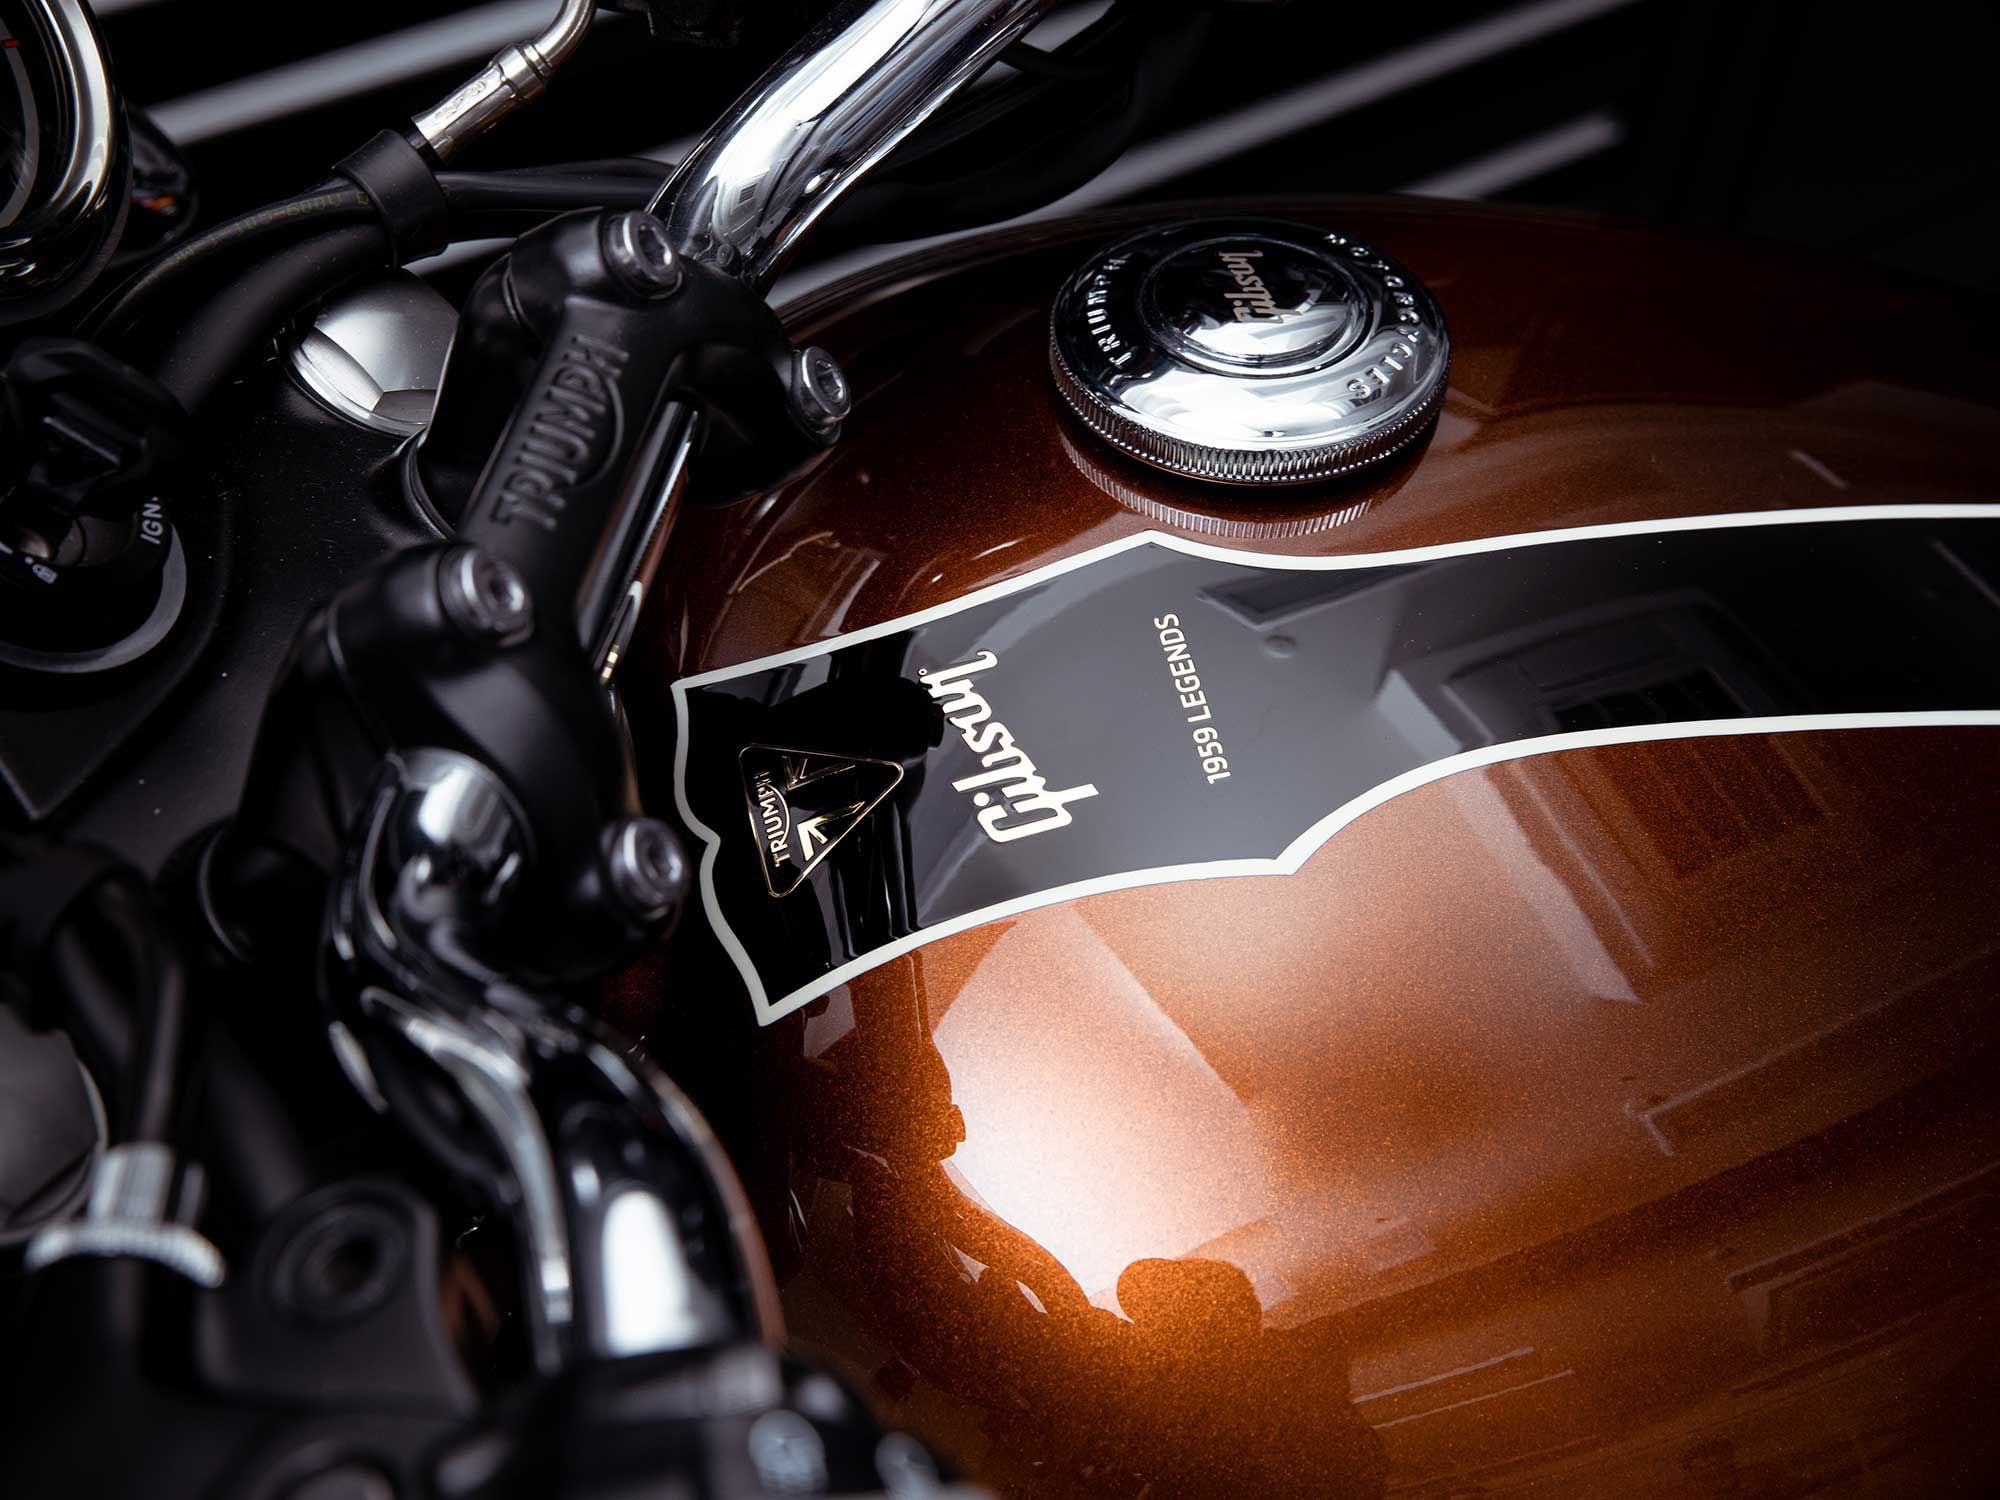 The custom Bonnie’s gas tank features a banner in the shape of a Les Paul guitar neck.